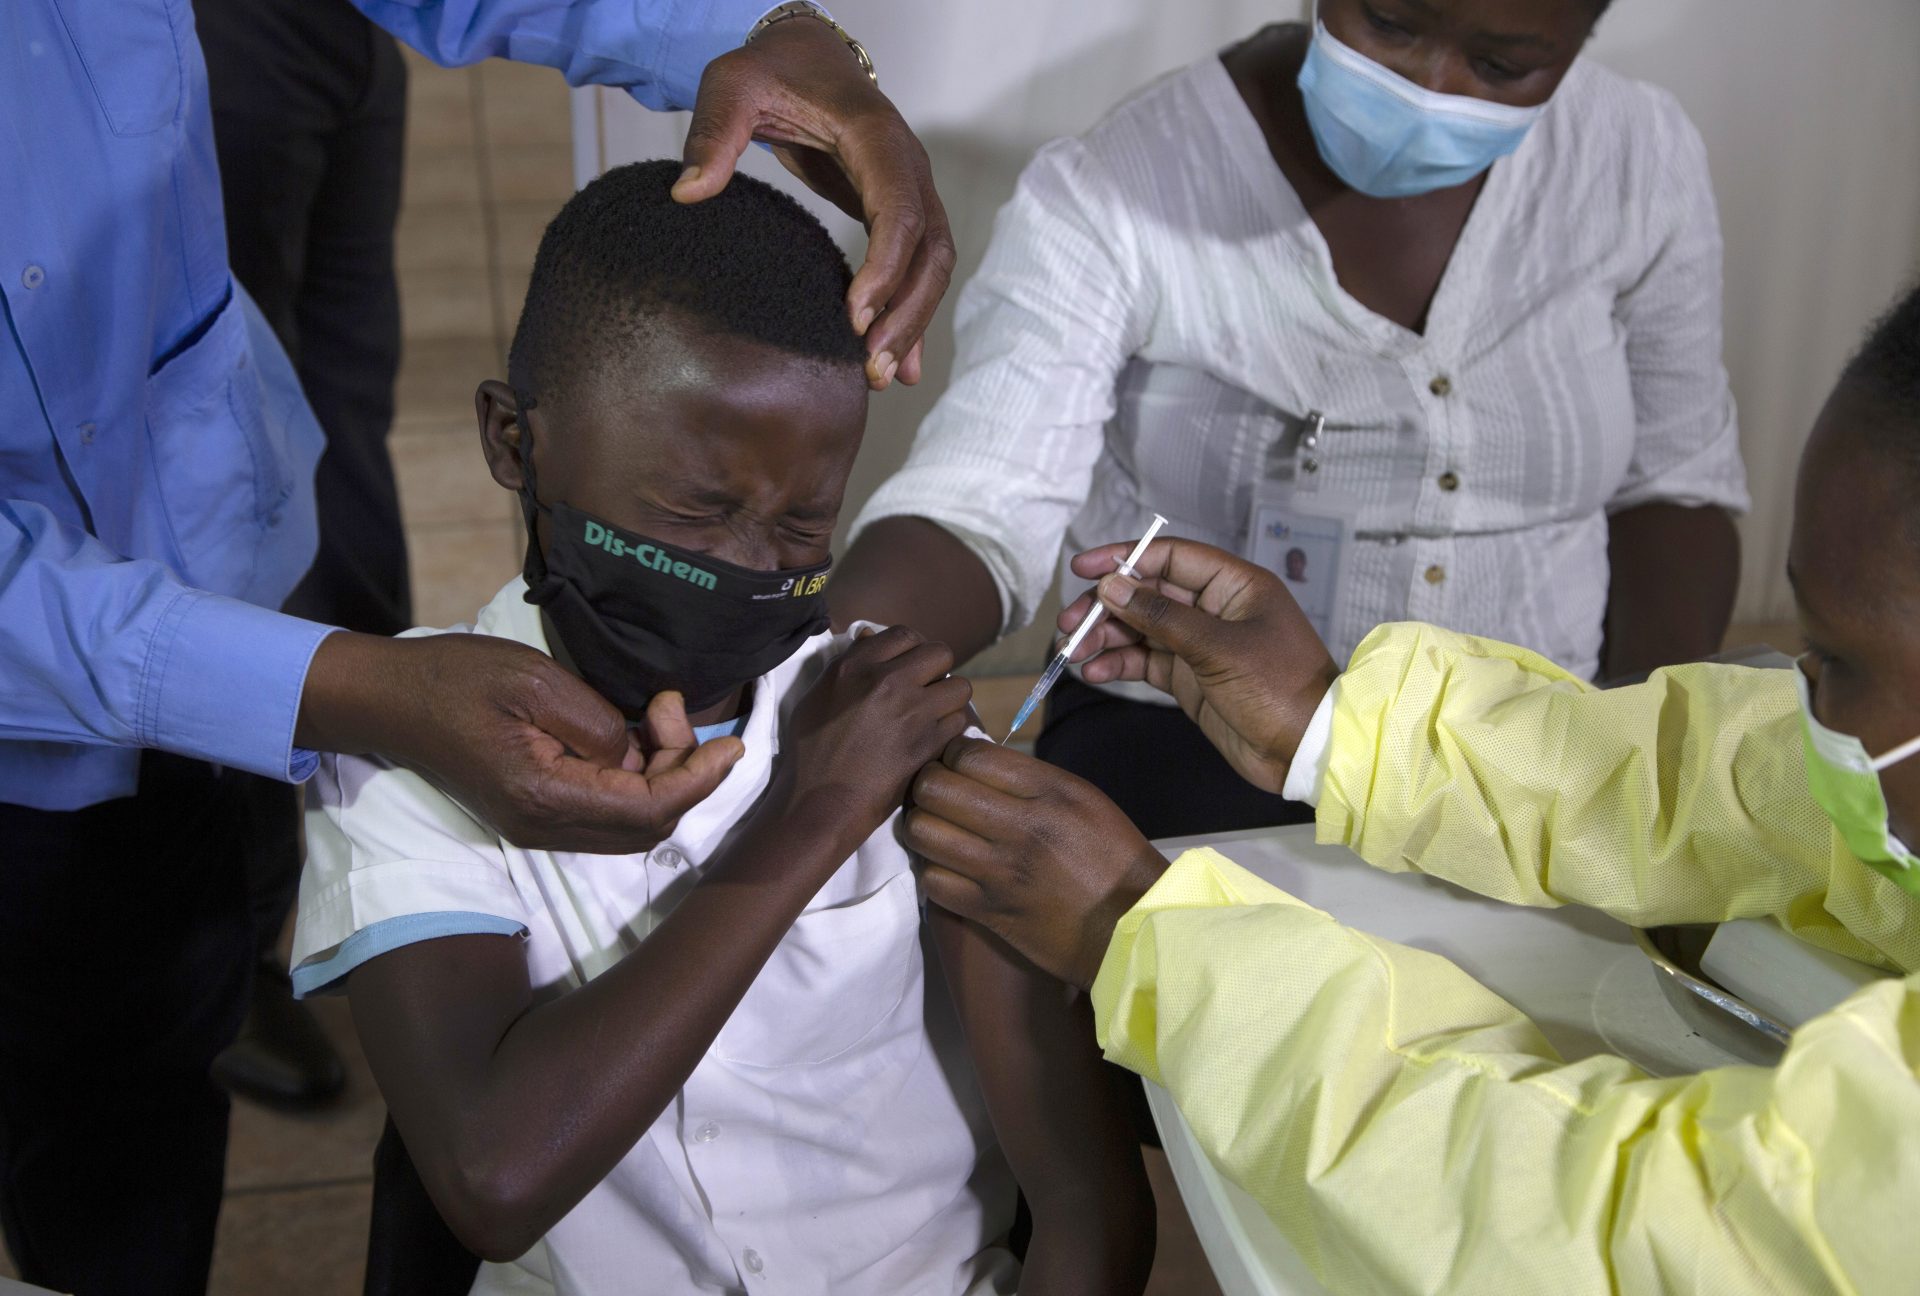 A child winces as he receives his Pfizer vaccine against COVID-19 in Diepsloot Township near Johannesburg, Thursday, Oct. 21, 2021.